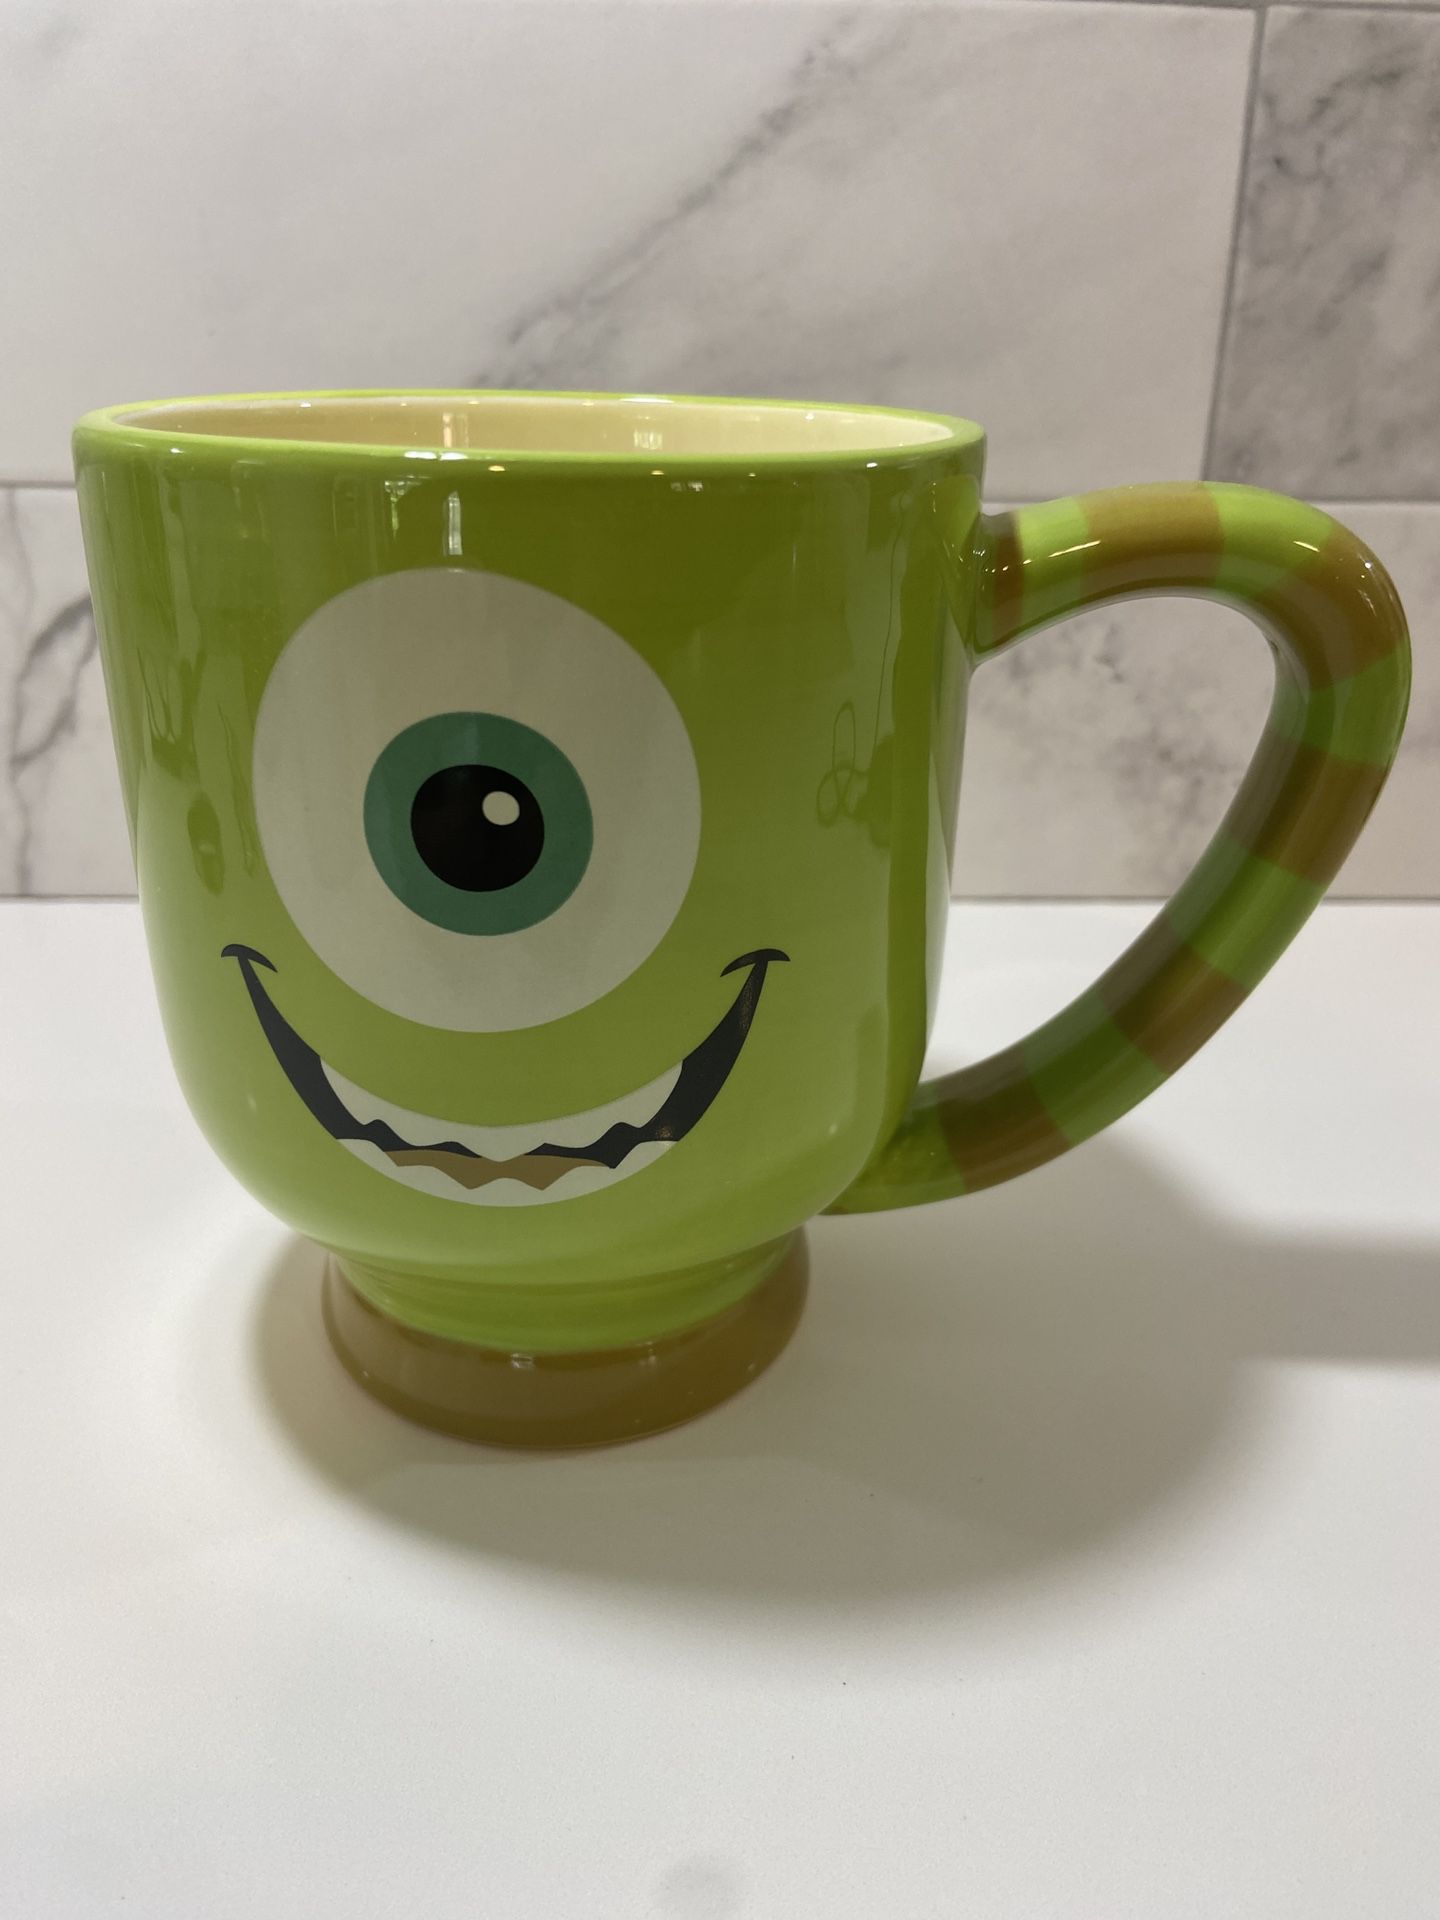 Monsters Inc Mike Wazowski Mug/Cup*Authentic From The Disney Store.